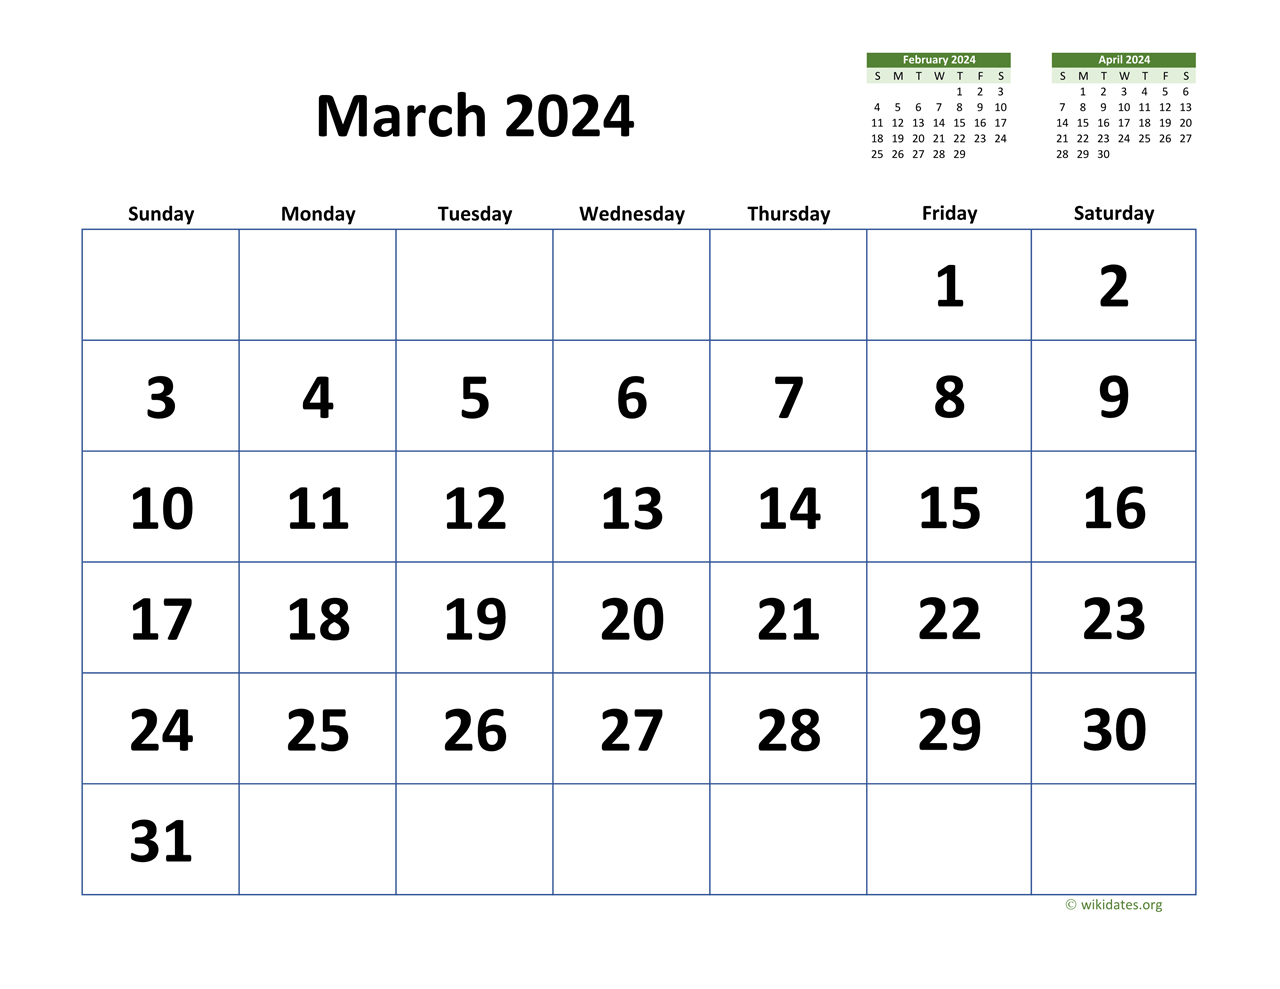 March 2024 Calendar with Extra-large Dates | WikiDates.org